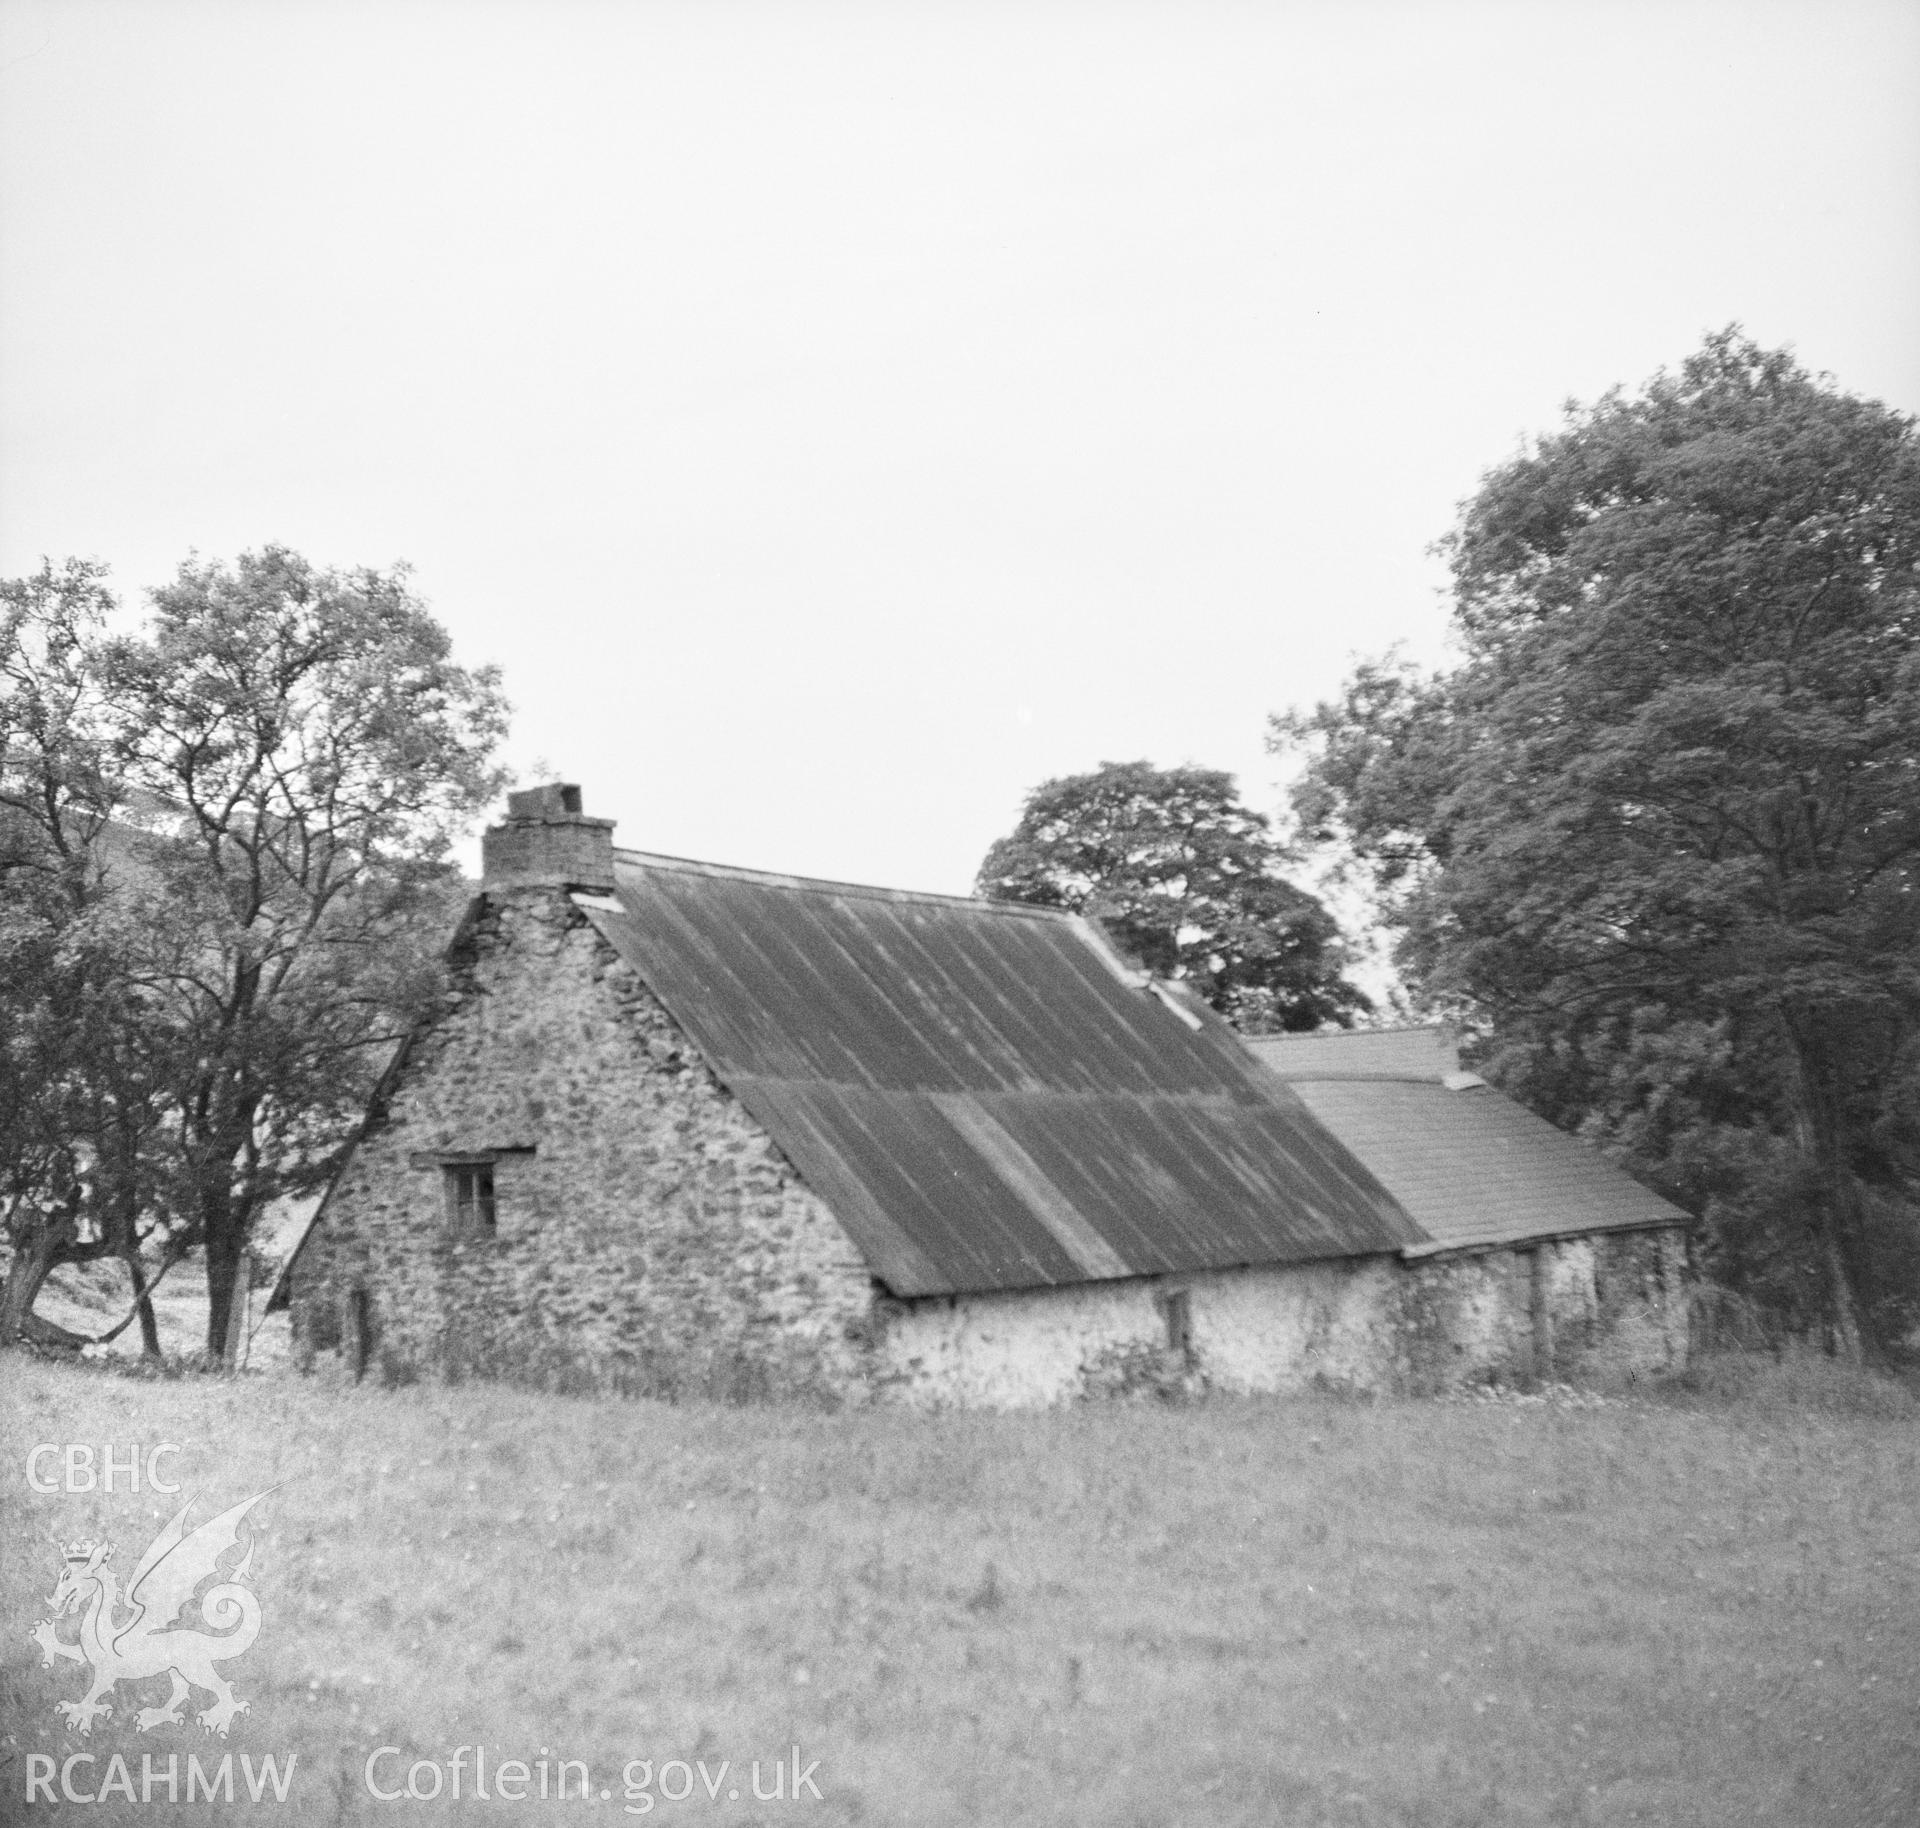 Digital copy of a black and white nitrate negative showing exterior view of Erw Domi, Porth-y-Rhyd, Carmarthenshire